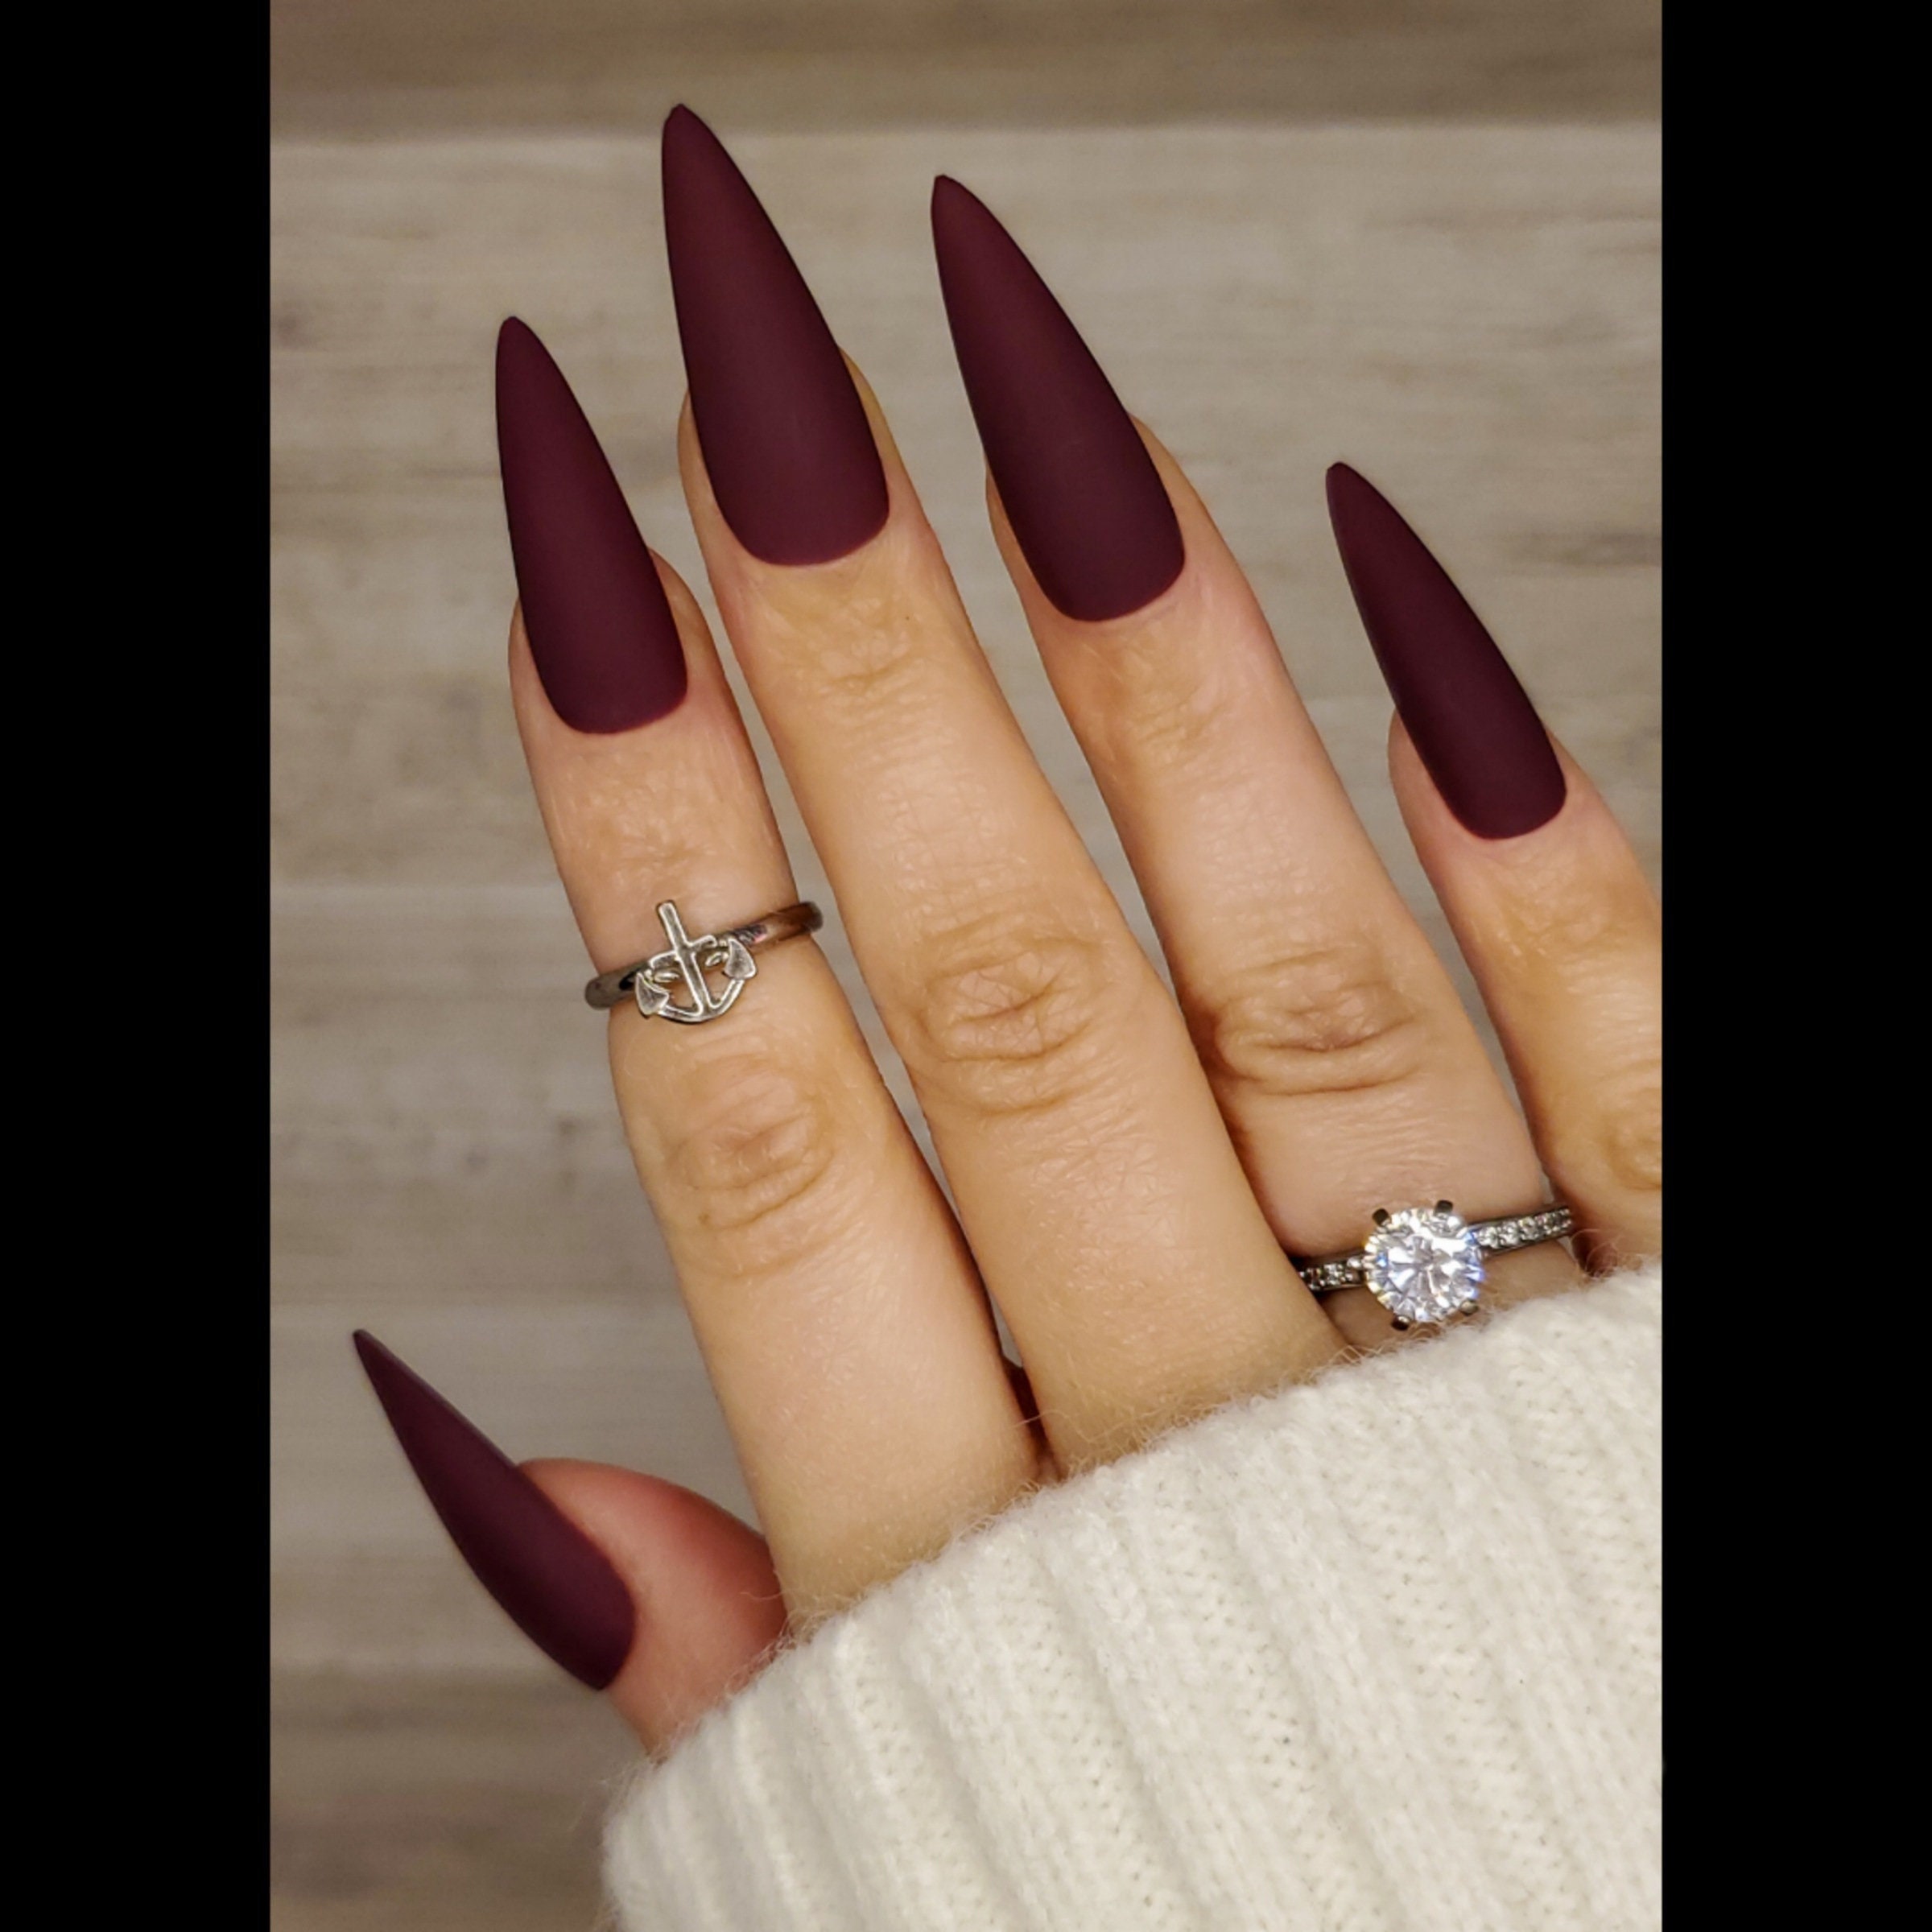 Burgundy Matte Nails Designs That Drop Your Jaw Off | Nail designs  valentines, Classy nail designs, Winter nail designs